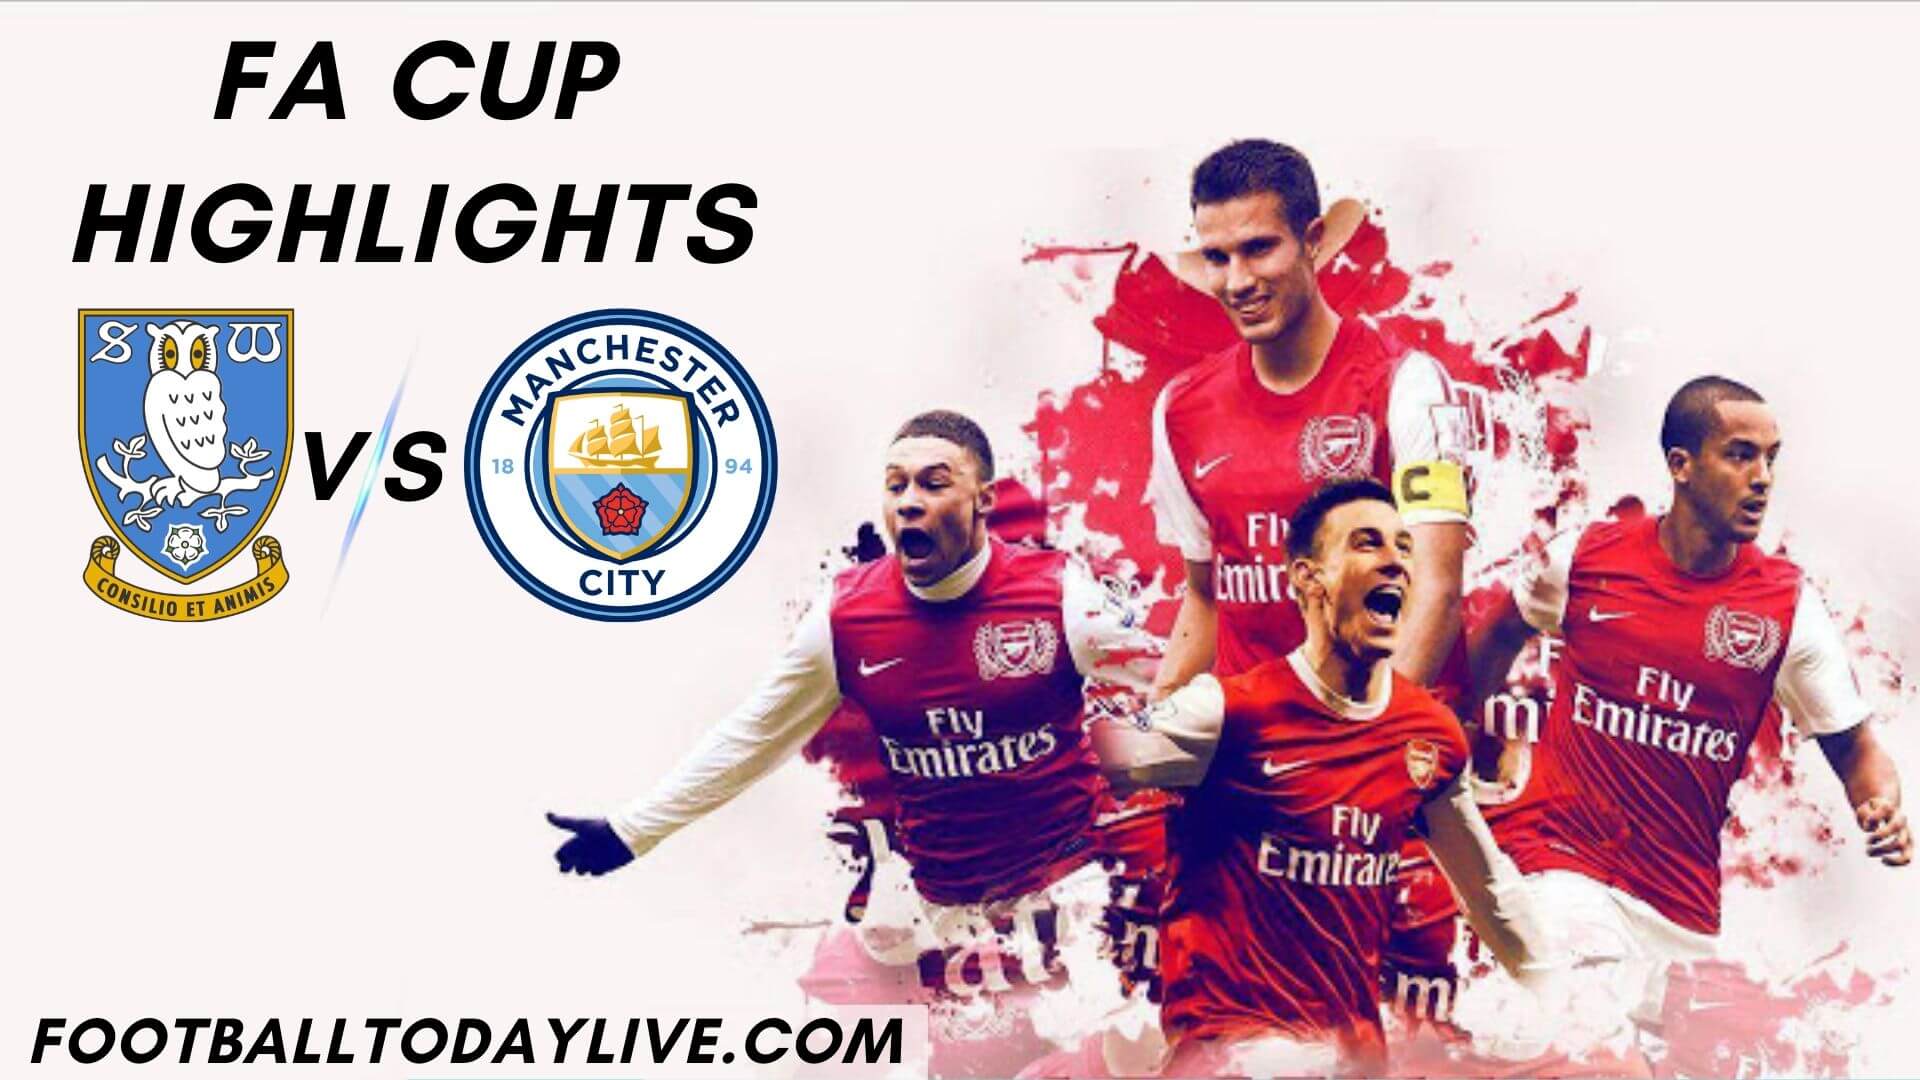 Sheffield Wednesday Vs Manchester City Highlights Rd 5 FA Cup 2020